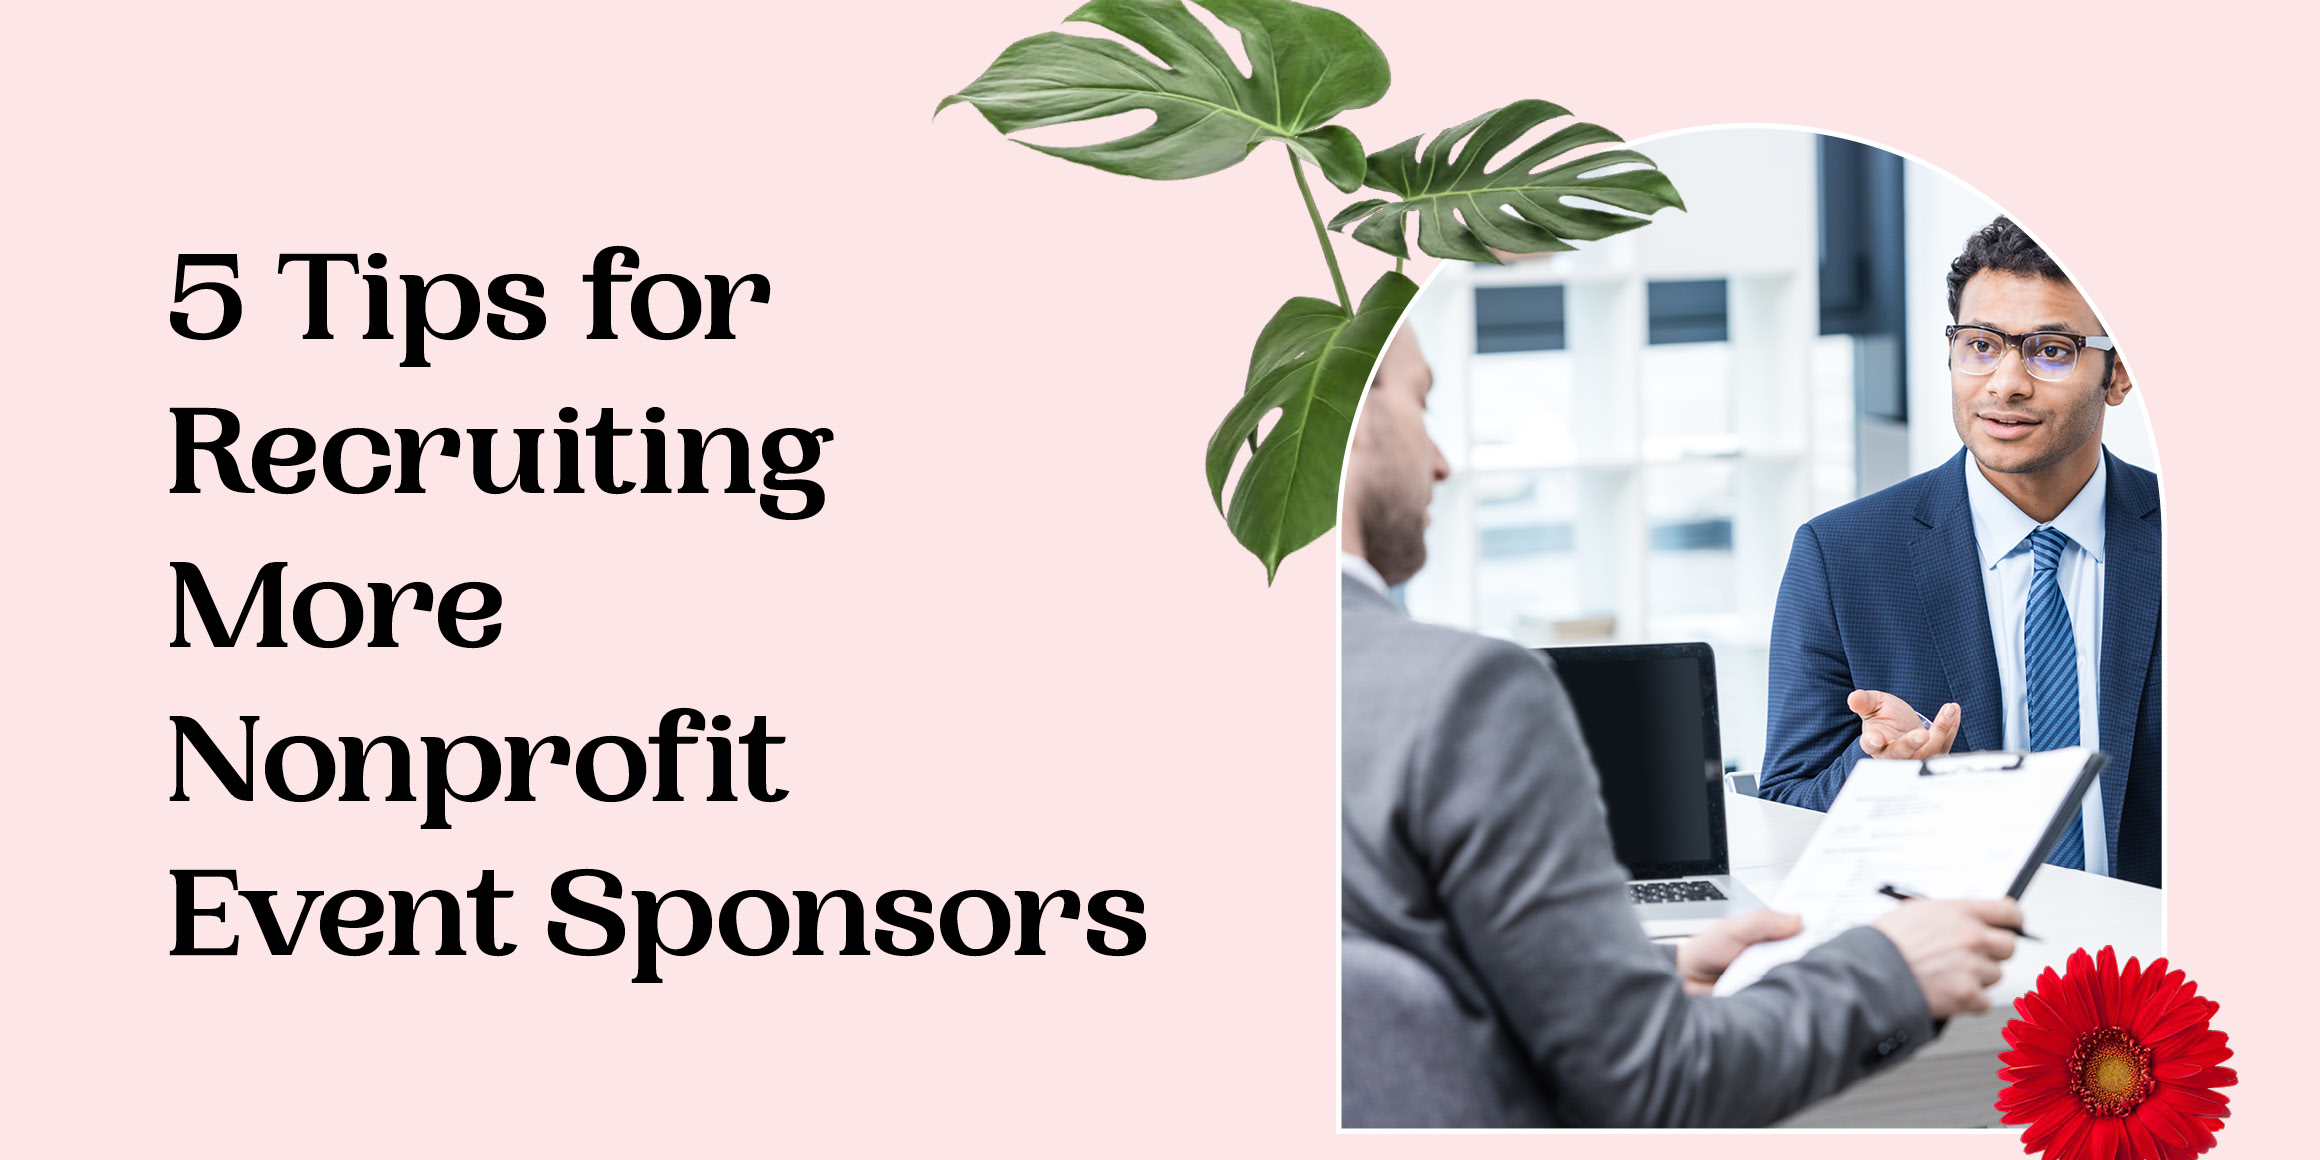 Use the five tips in this guide to recruit more event sponsors for your nonprofit’s events.